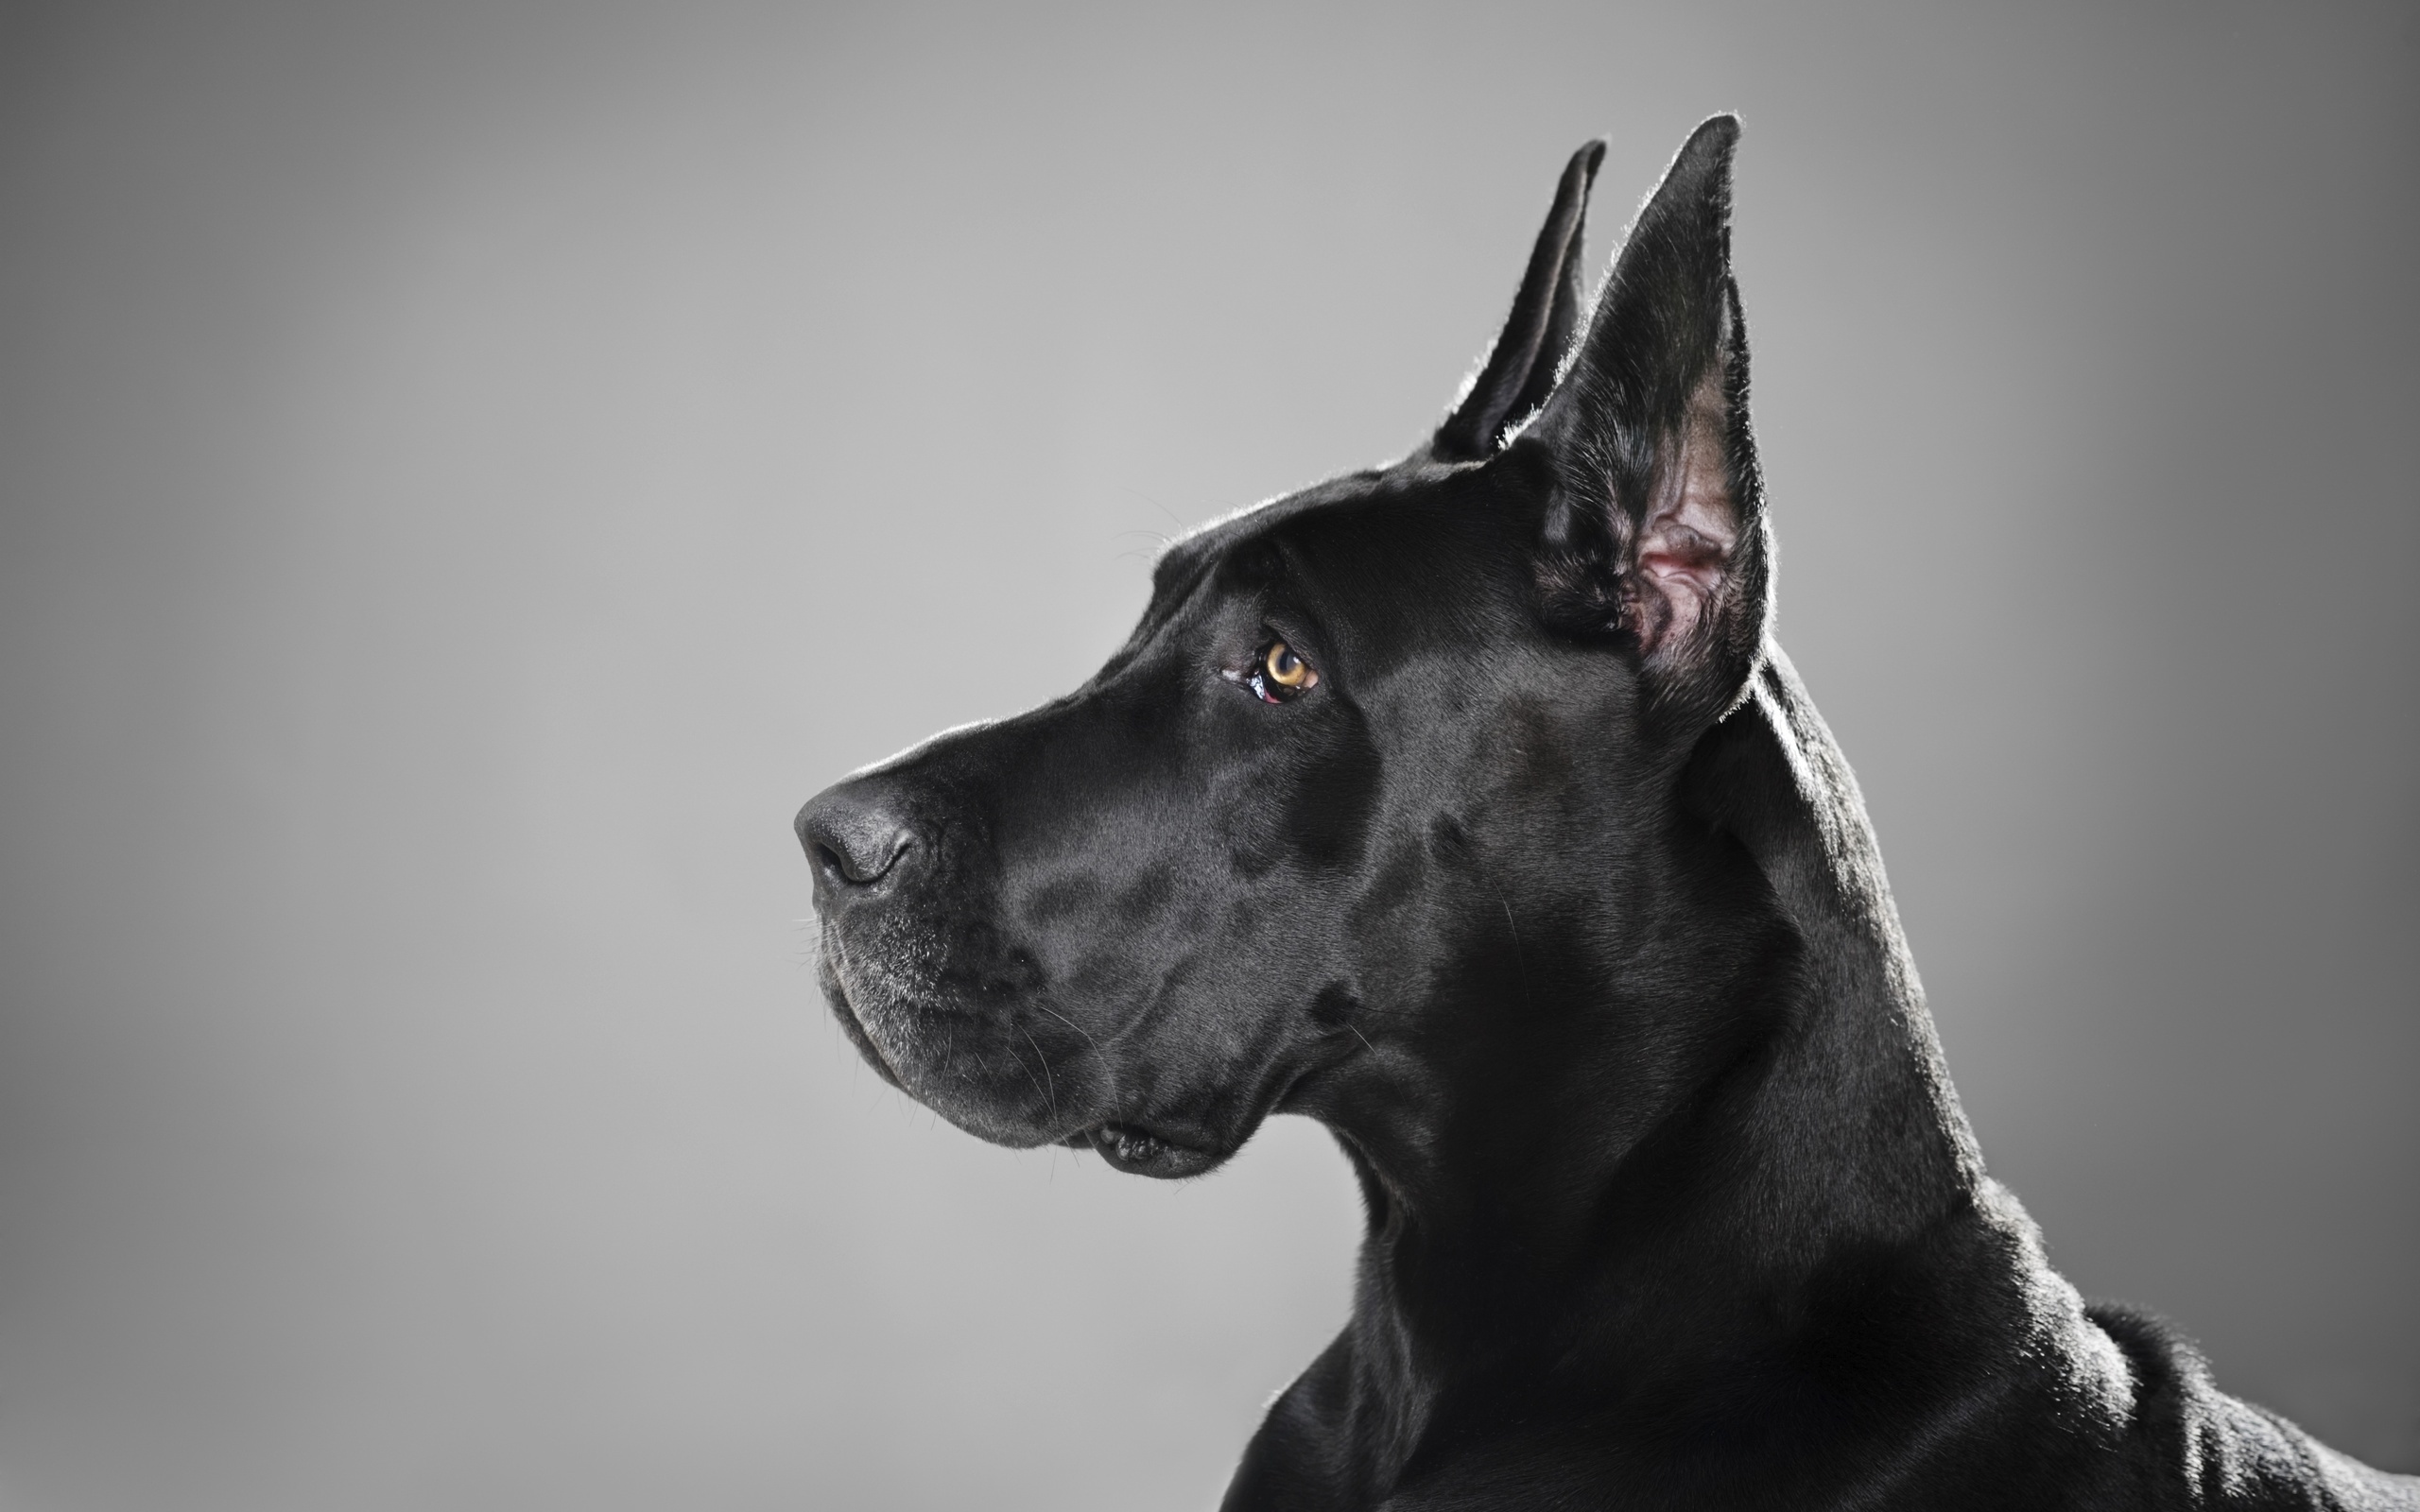 Great Dane: Giant-breed dogs, Males reaching 32 inches tall, The massive head and the prominent eyebrows. 2560x1600 HD Wallpaper.